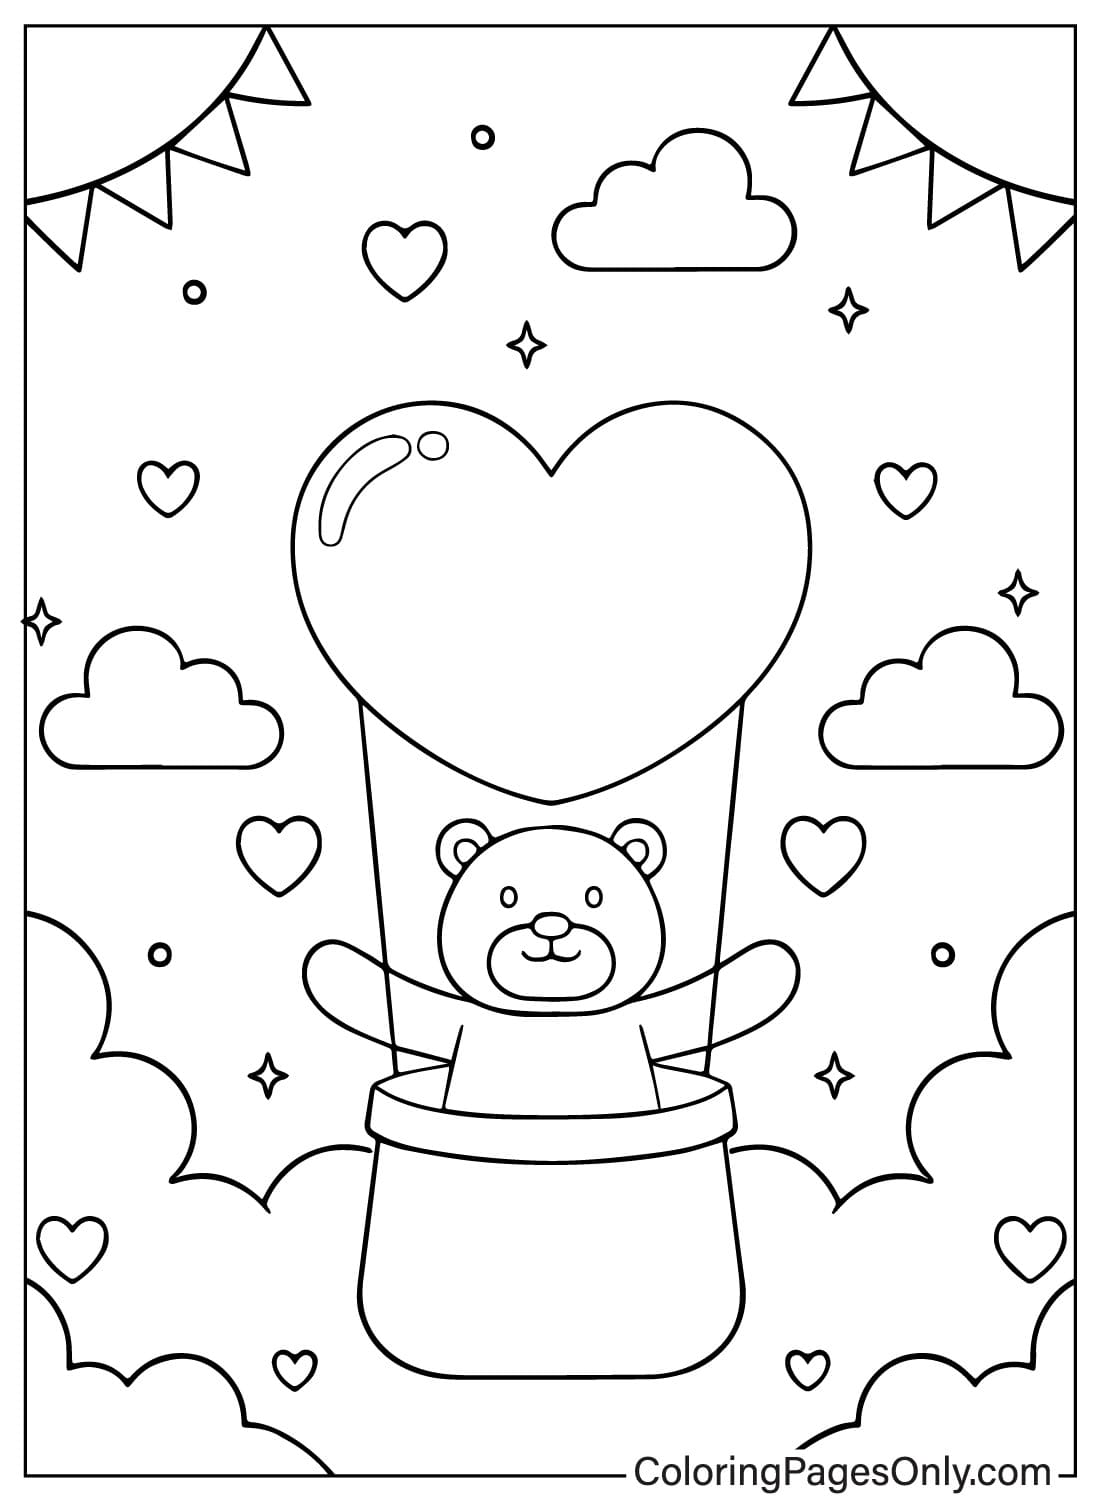 Free Teddy Bear Coloring Page Coloring Page